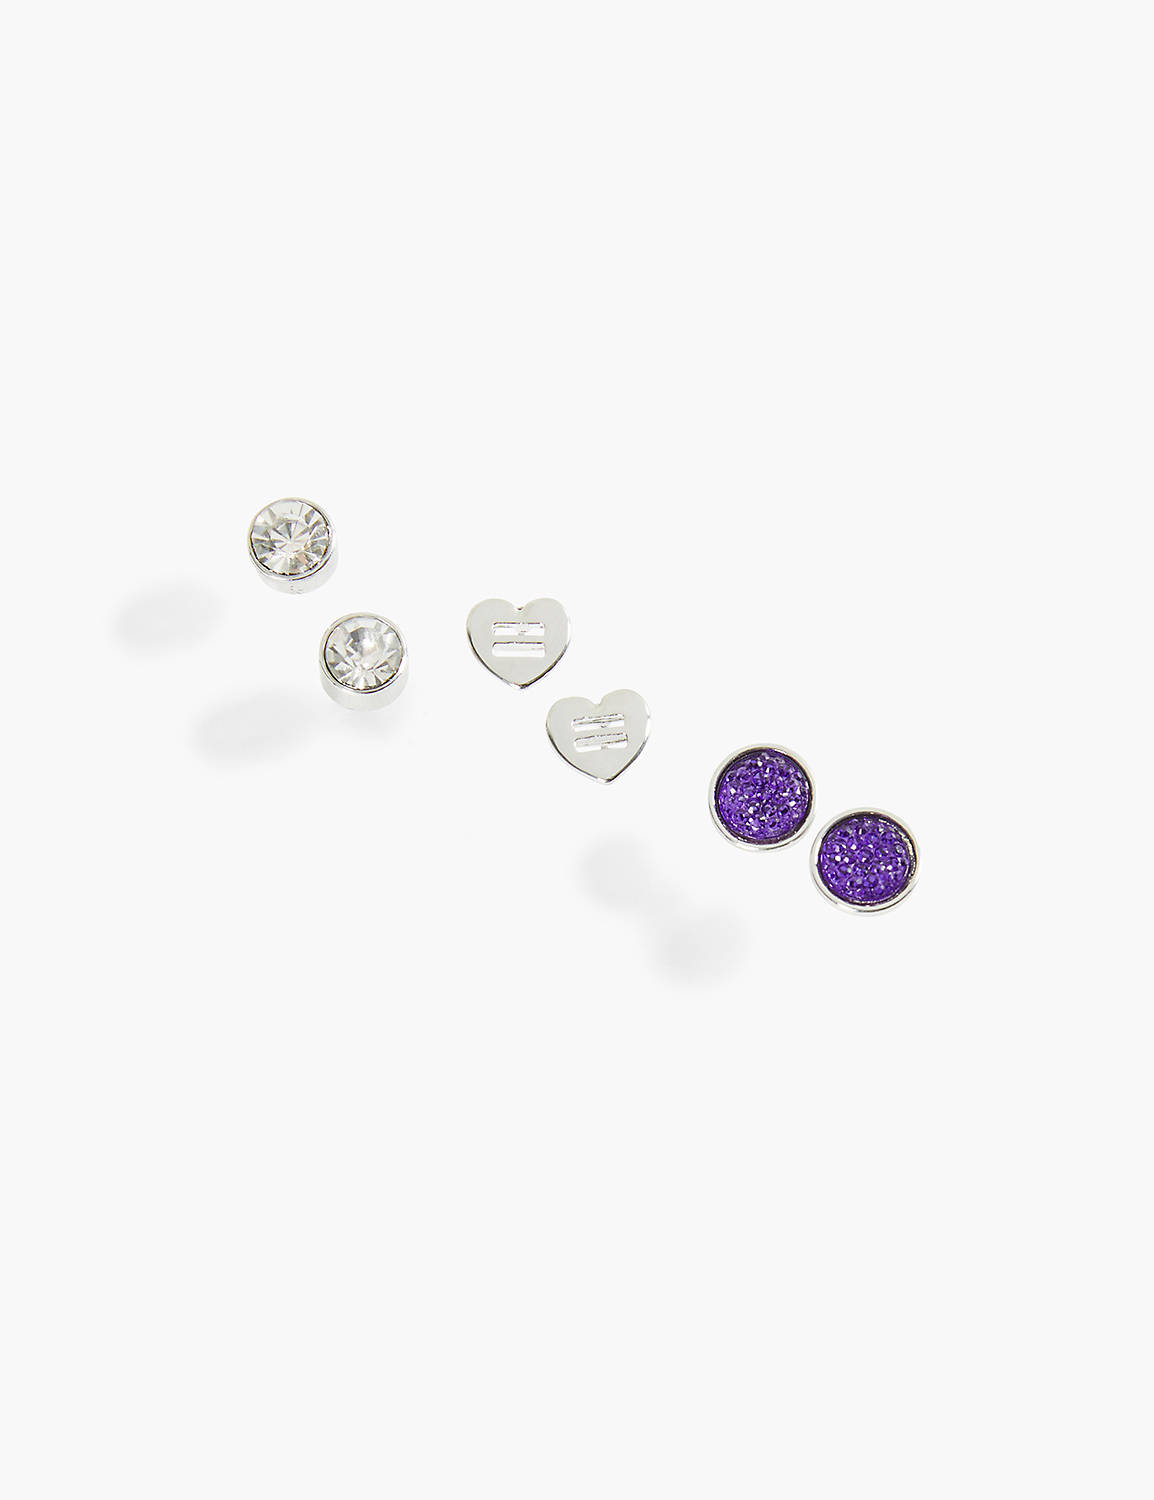 IWD EARRING PACK Product Image 1